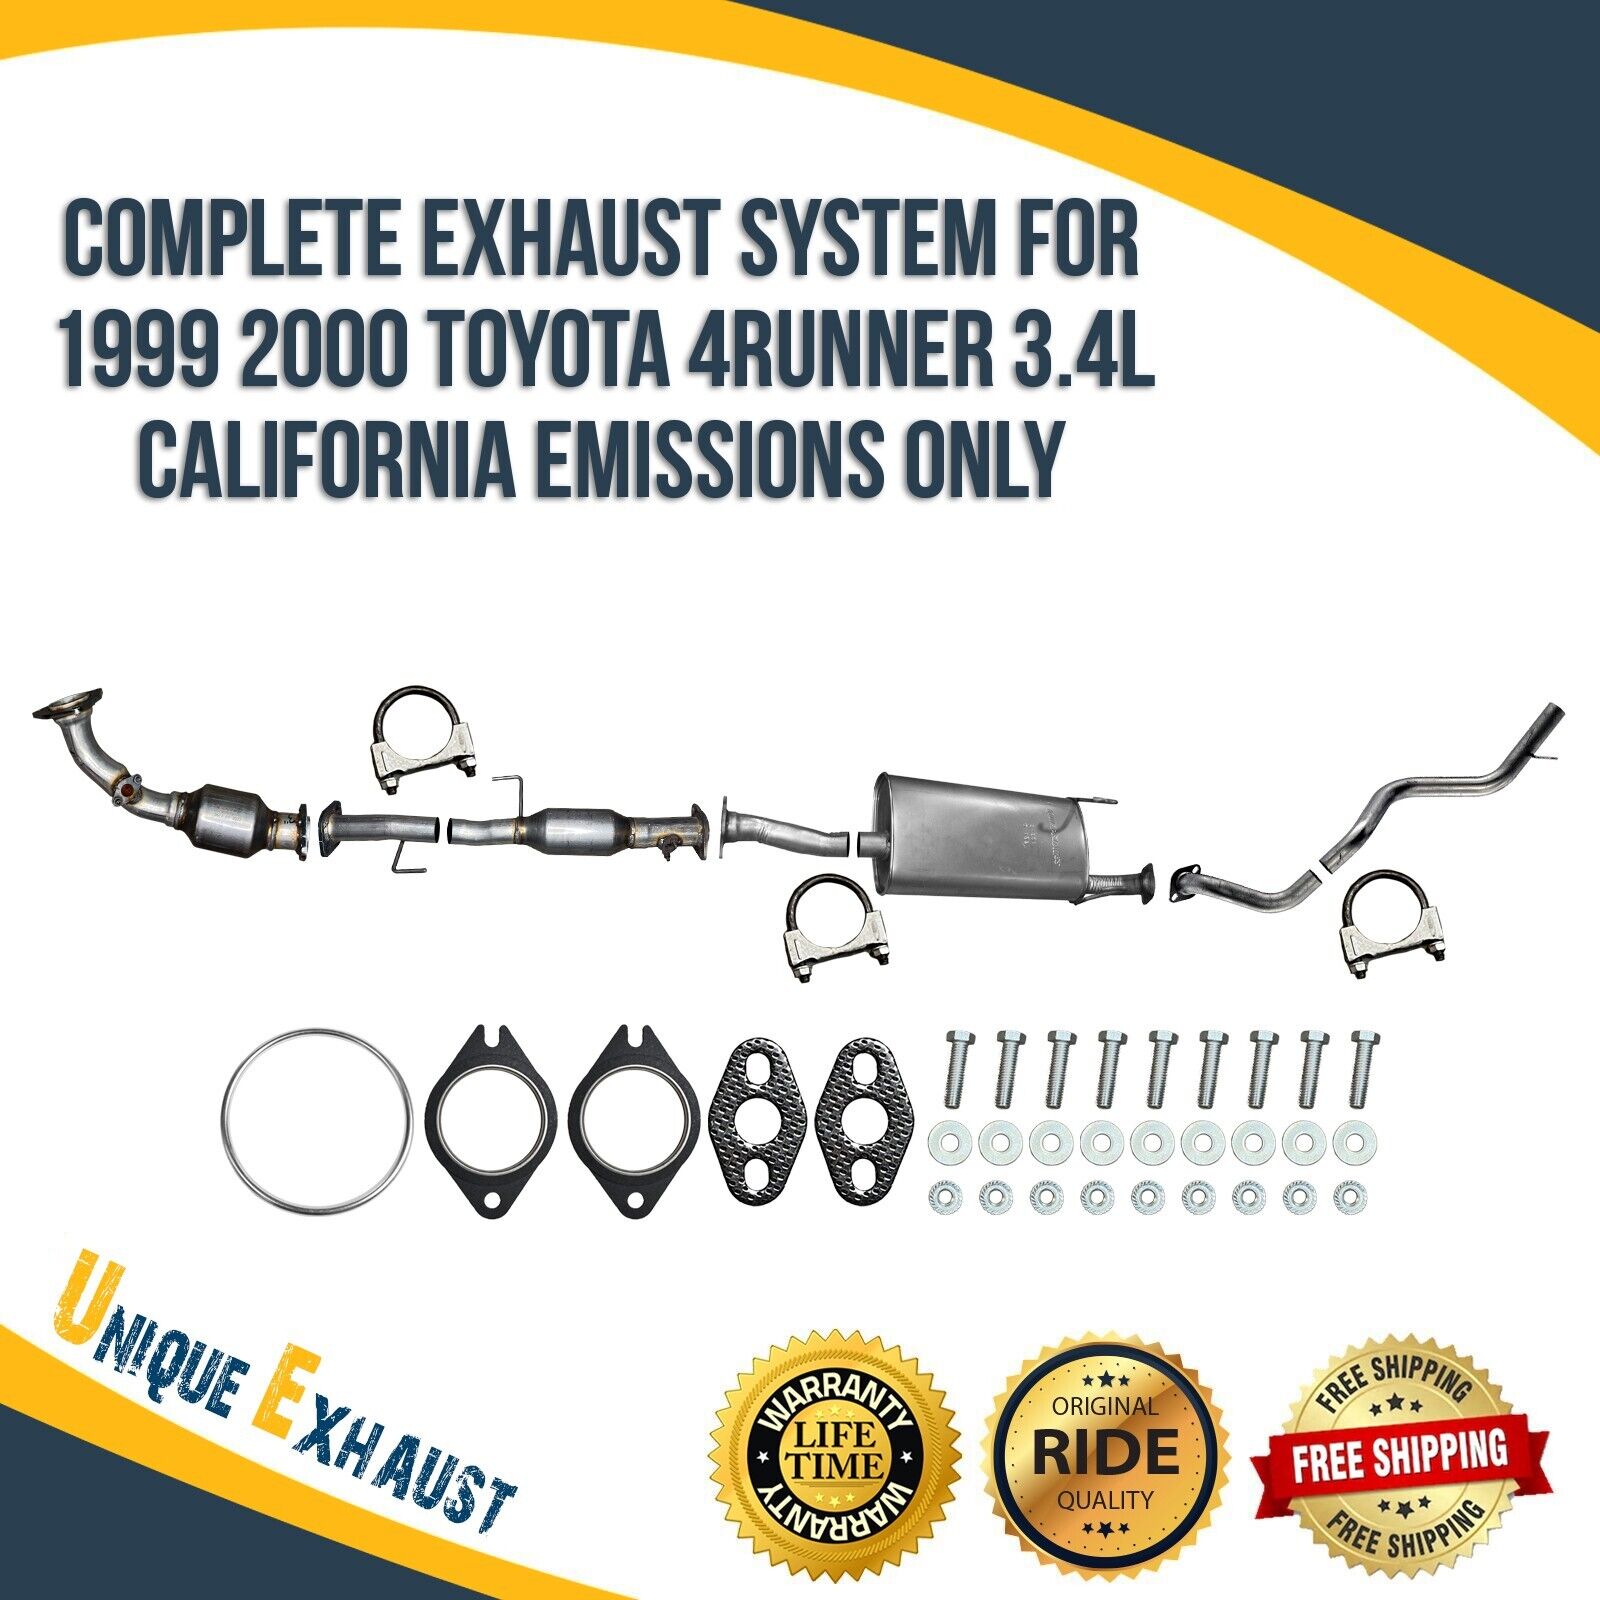 Complete Exhaust System for 1999-2000 Toyota 4Runner 3.4L California Emissions